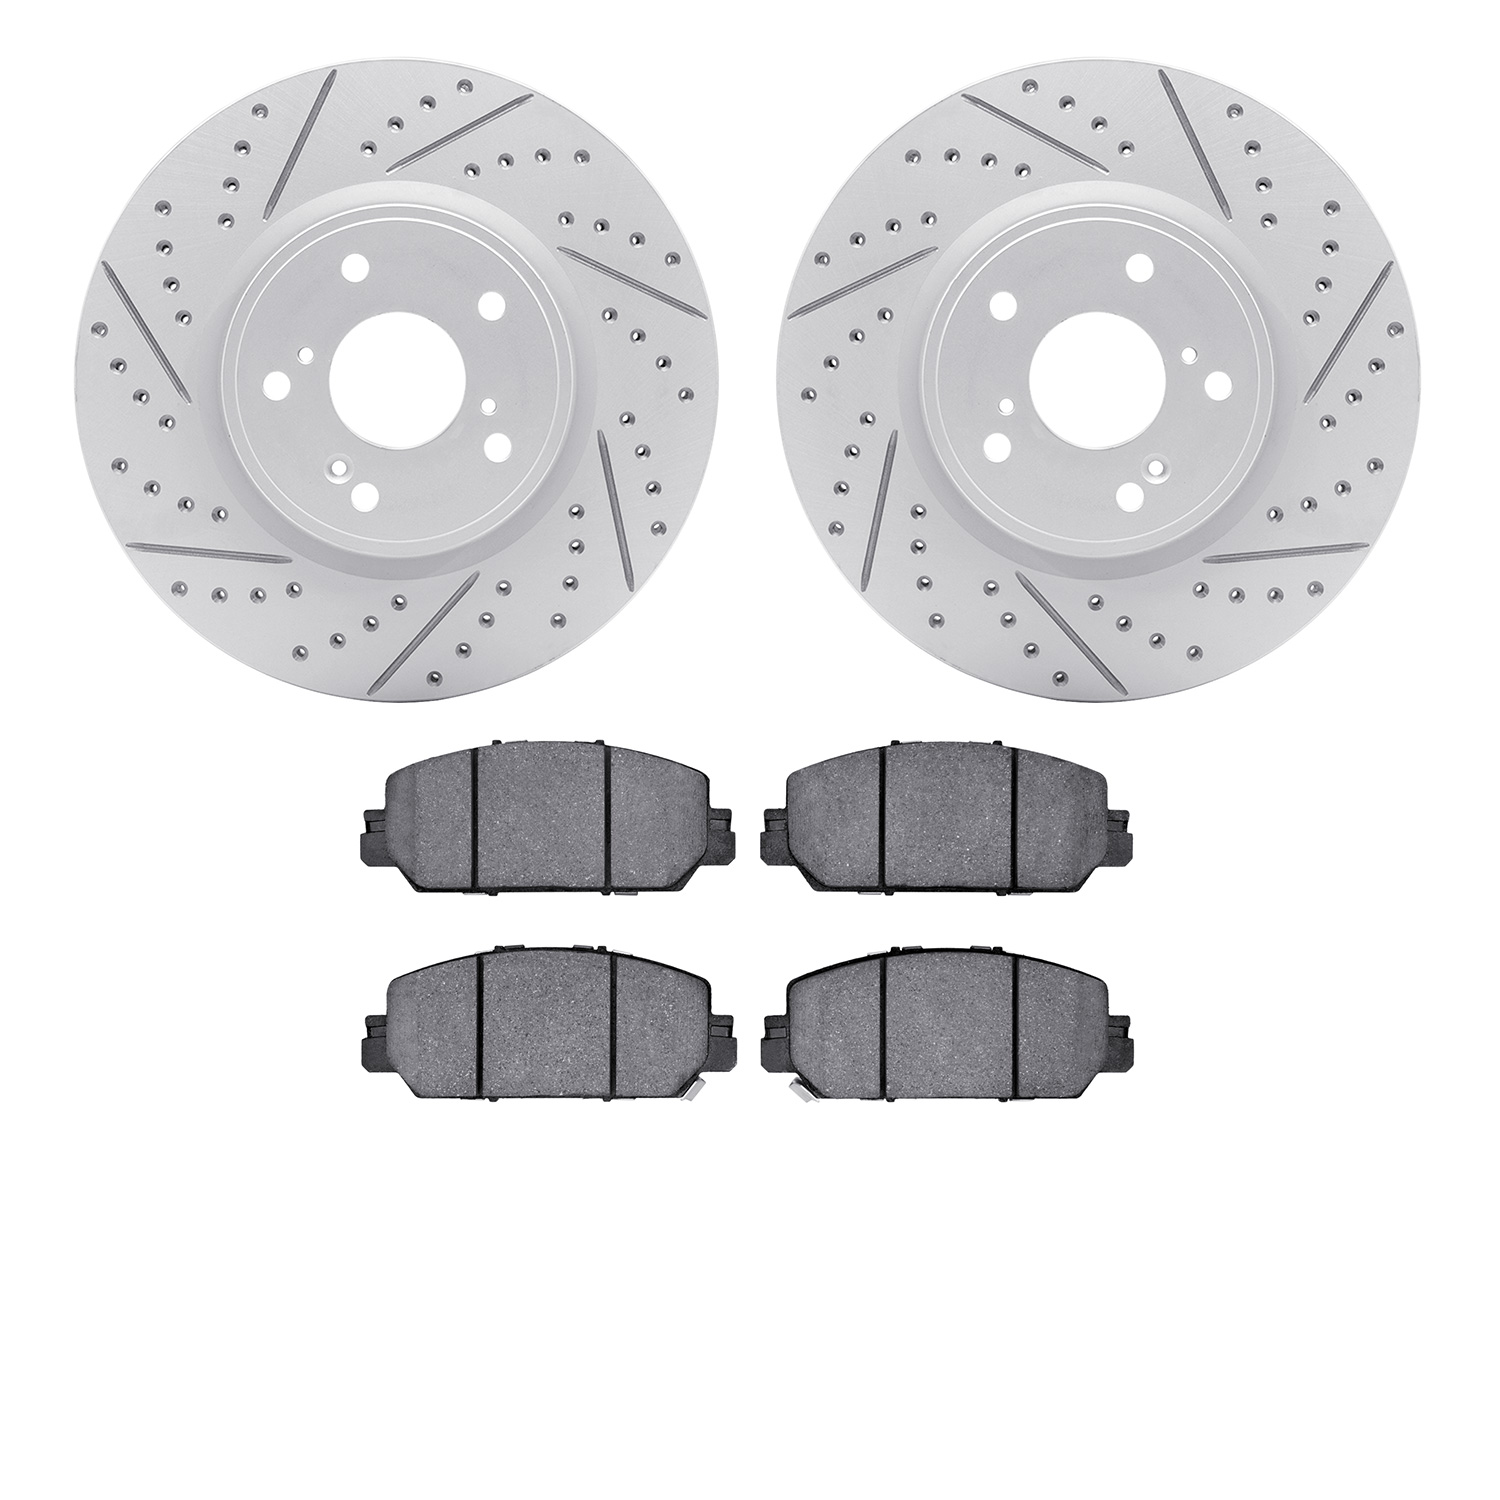 2502-59111 Geoperformance Drilled/Slotted Rotors w/5000 Advanced Brake Pads Kit, Fits Select Acura/Honda, Position: Front